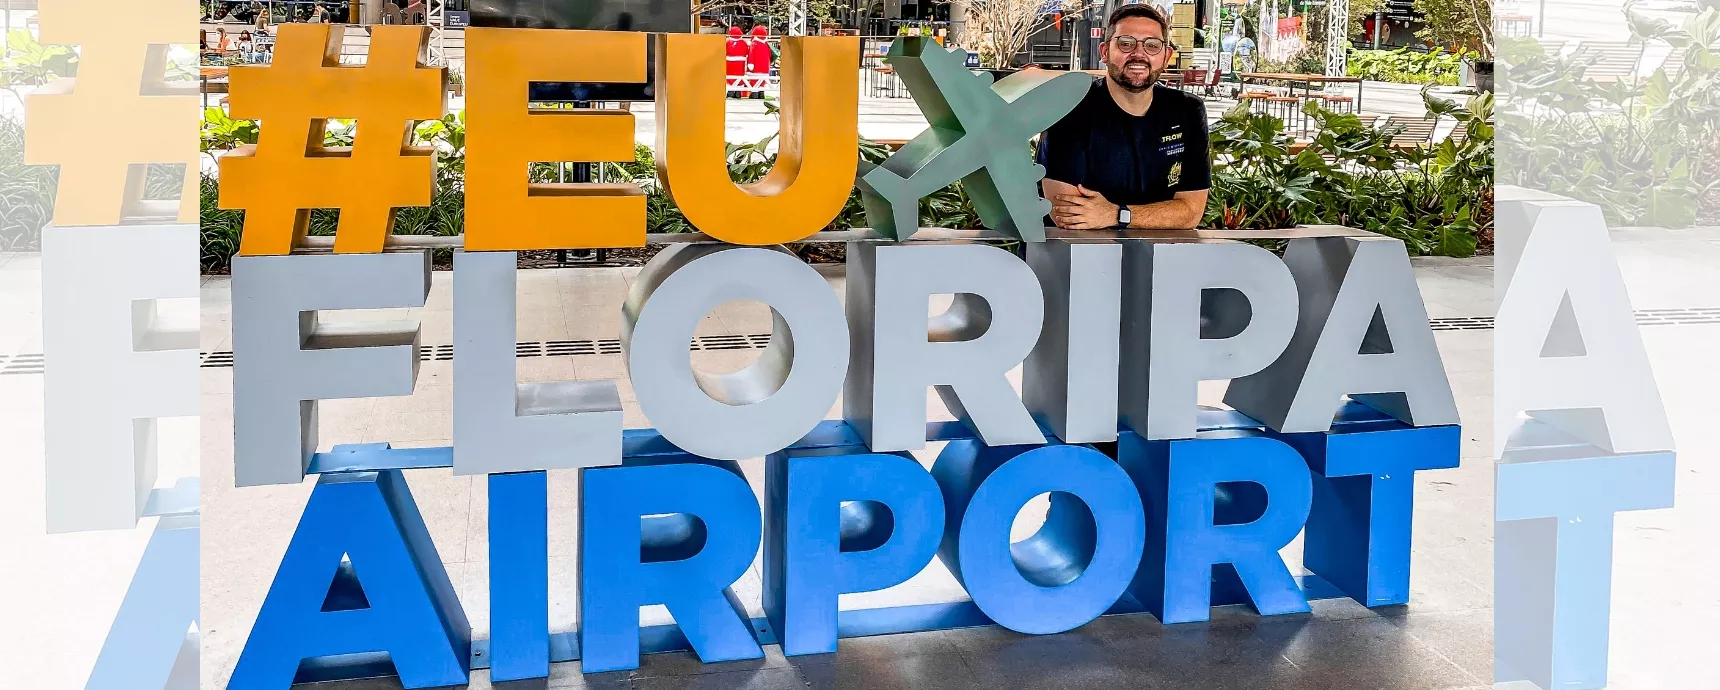 Florianópolis International Airport promotes special tour with Airport Talk to celebrate anniversary